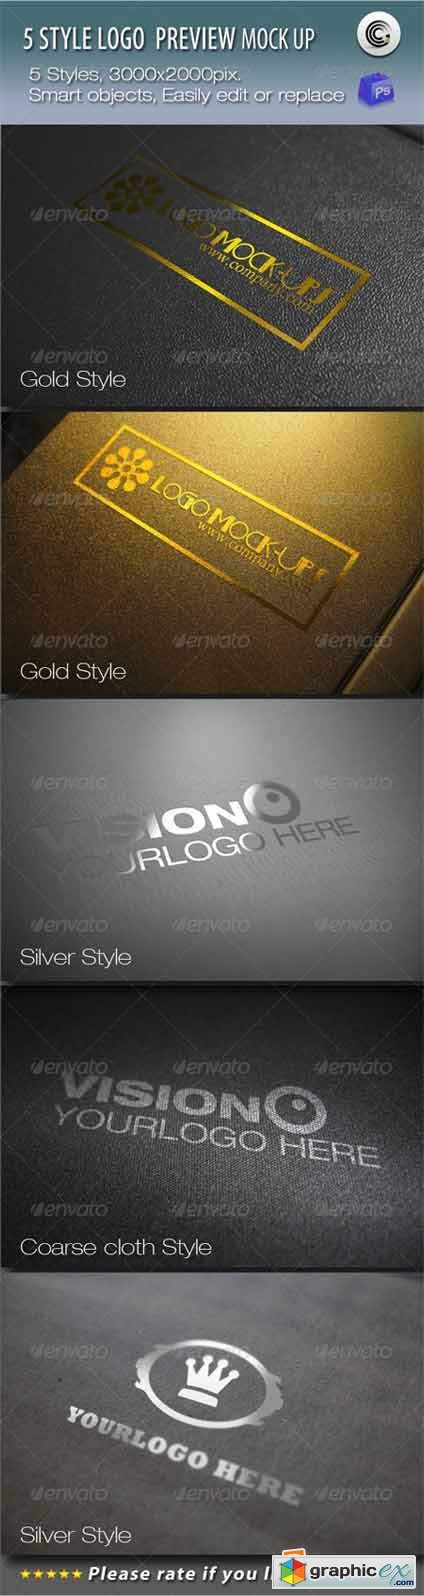 5 Styles Logo Preview Mock-ups 683452